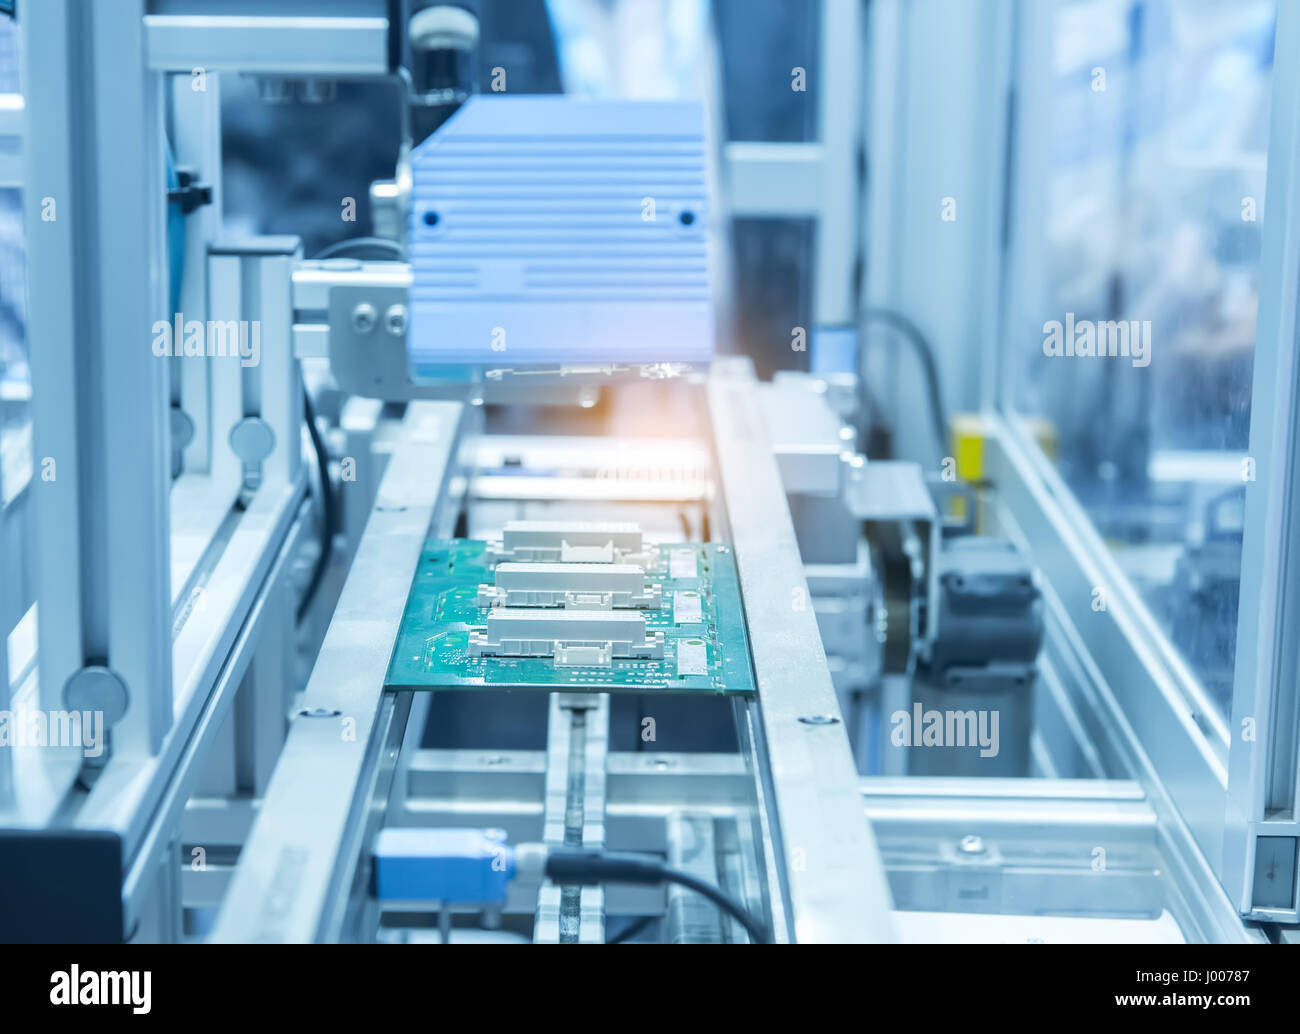 industrial machine robot in assembly line working in factory. Smart factory industry 4.0 concept. Stock Photo